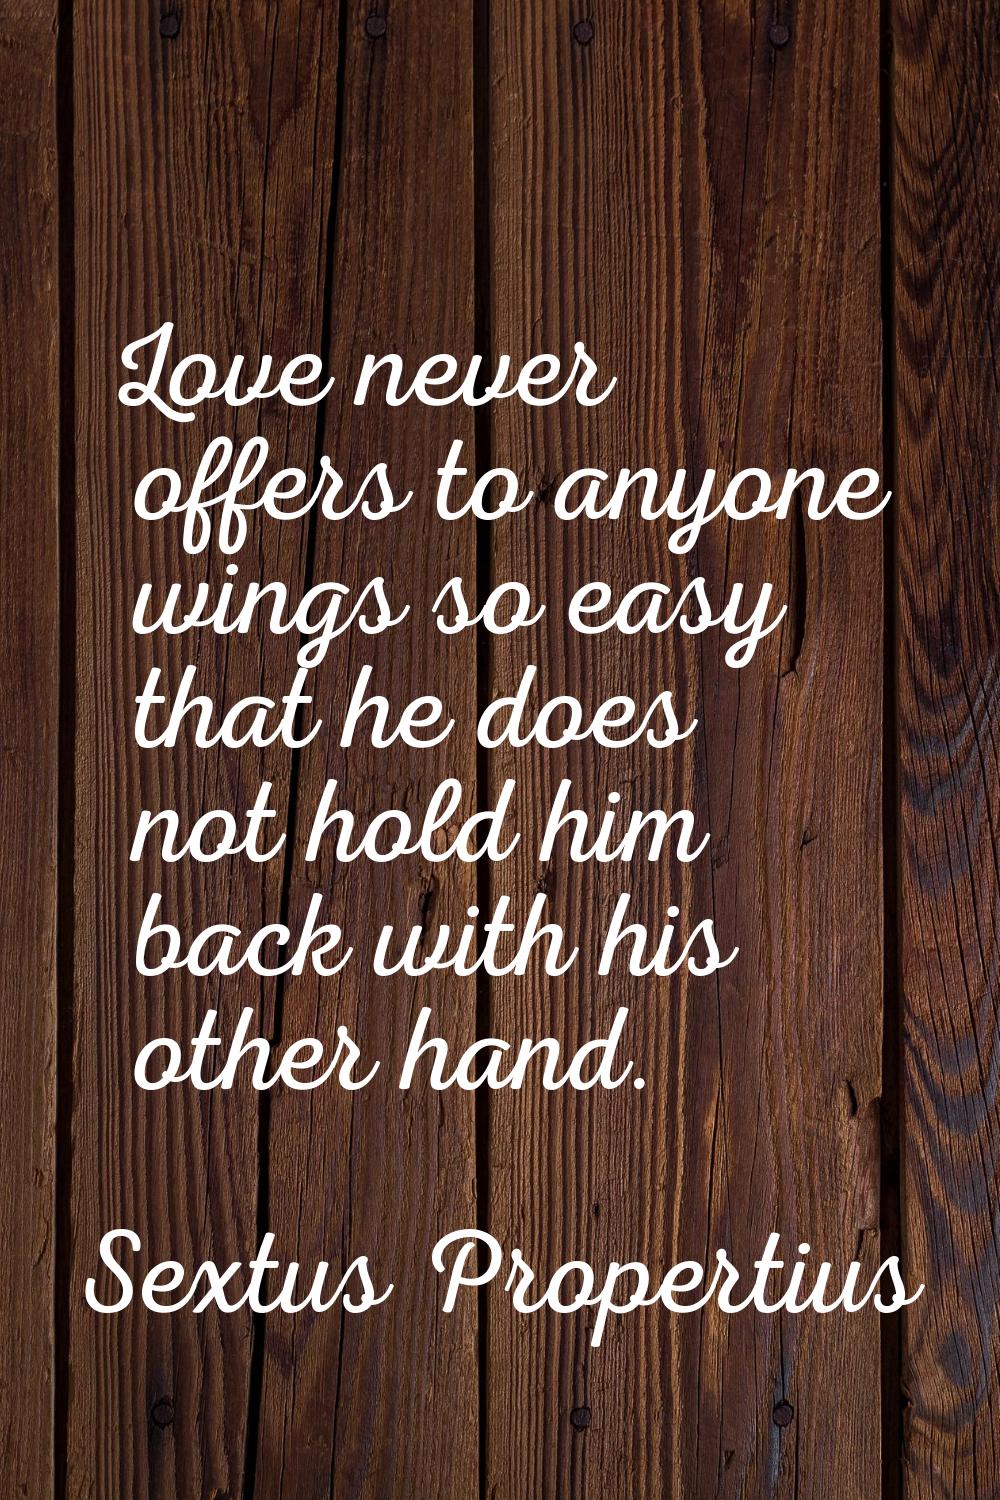 Love never offers to anyone wings so easy that he does not hold him back with his other hand.